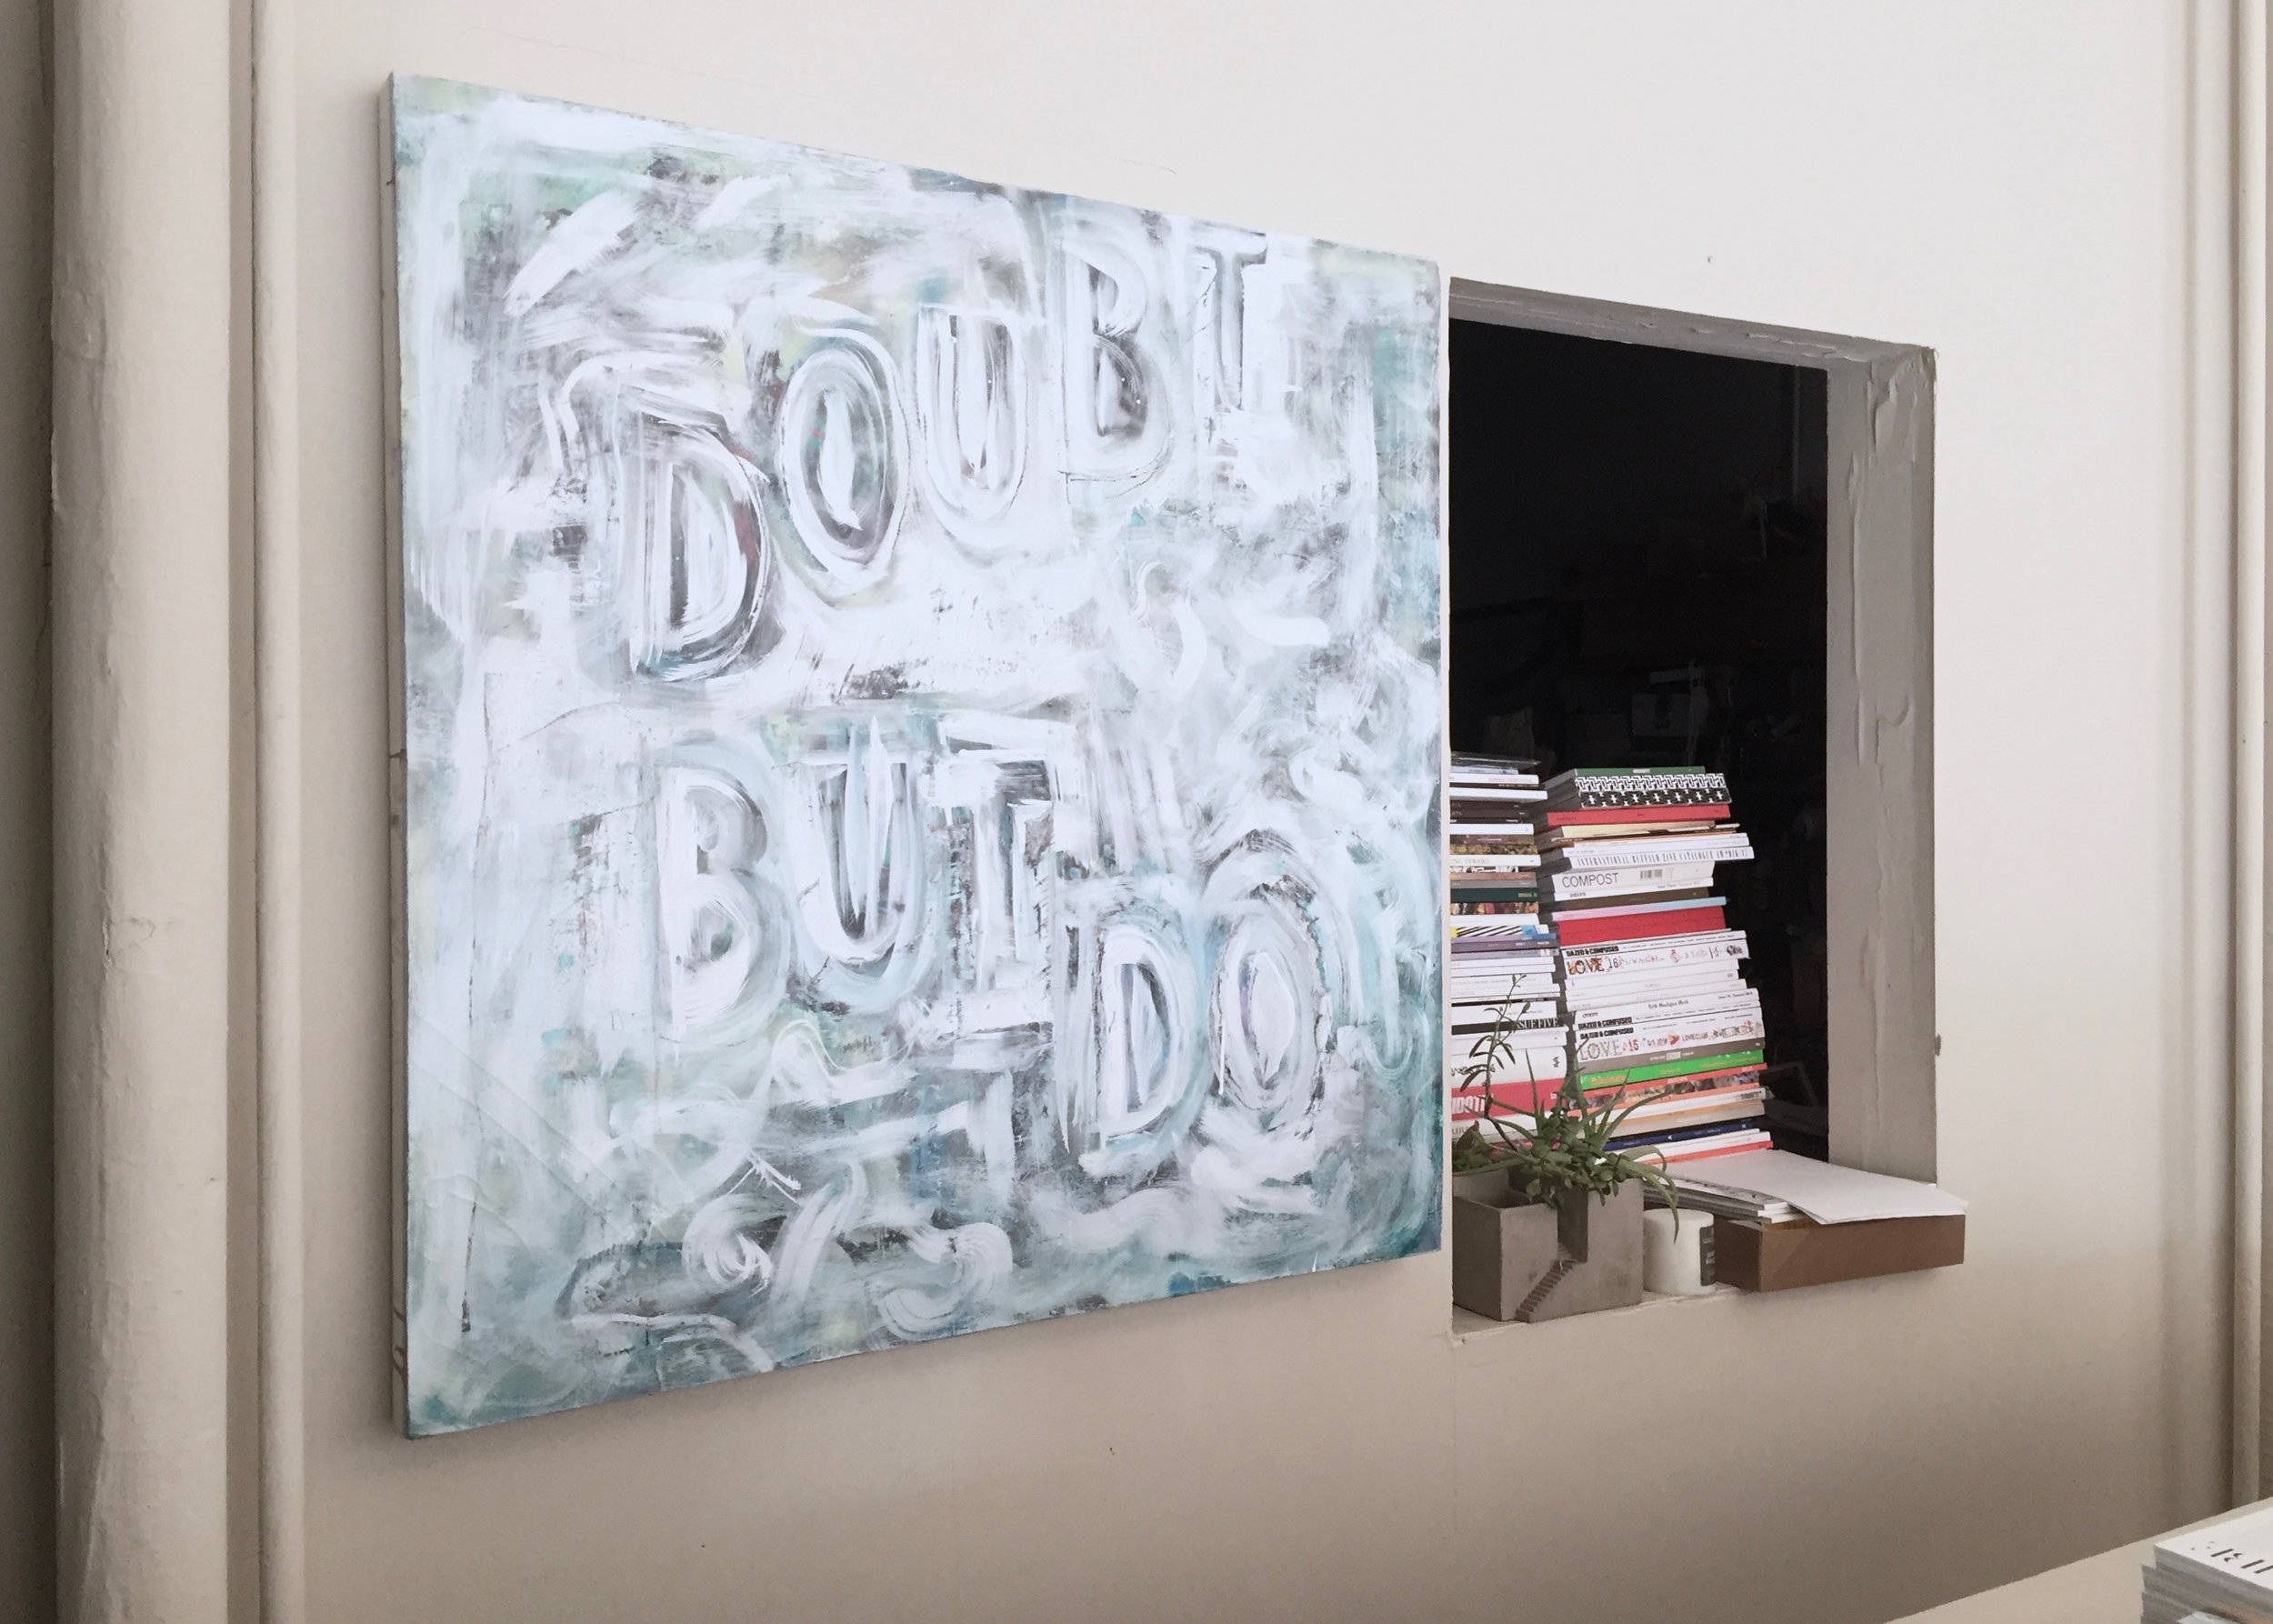   Doubt But Do , oil and acrylic on canvas, ca. 2014 